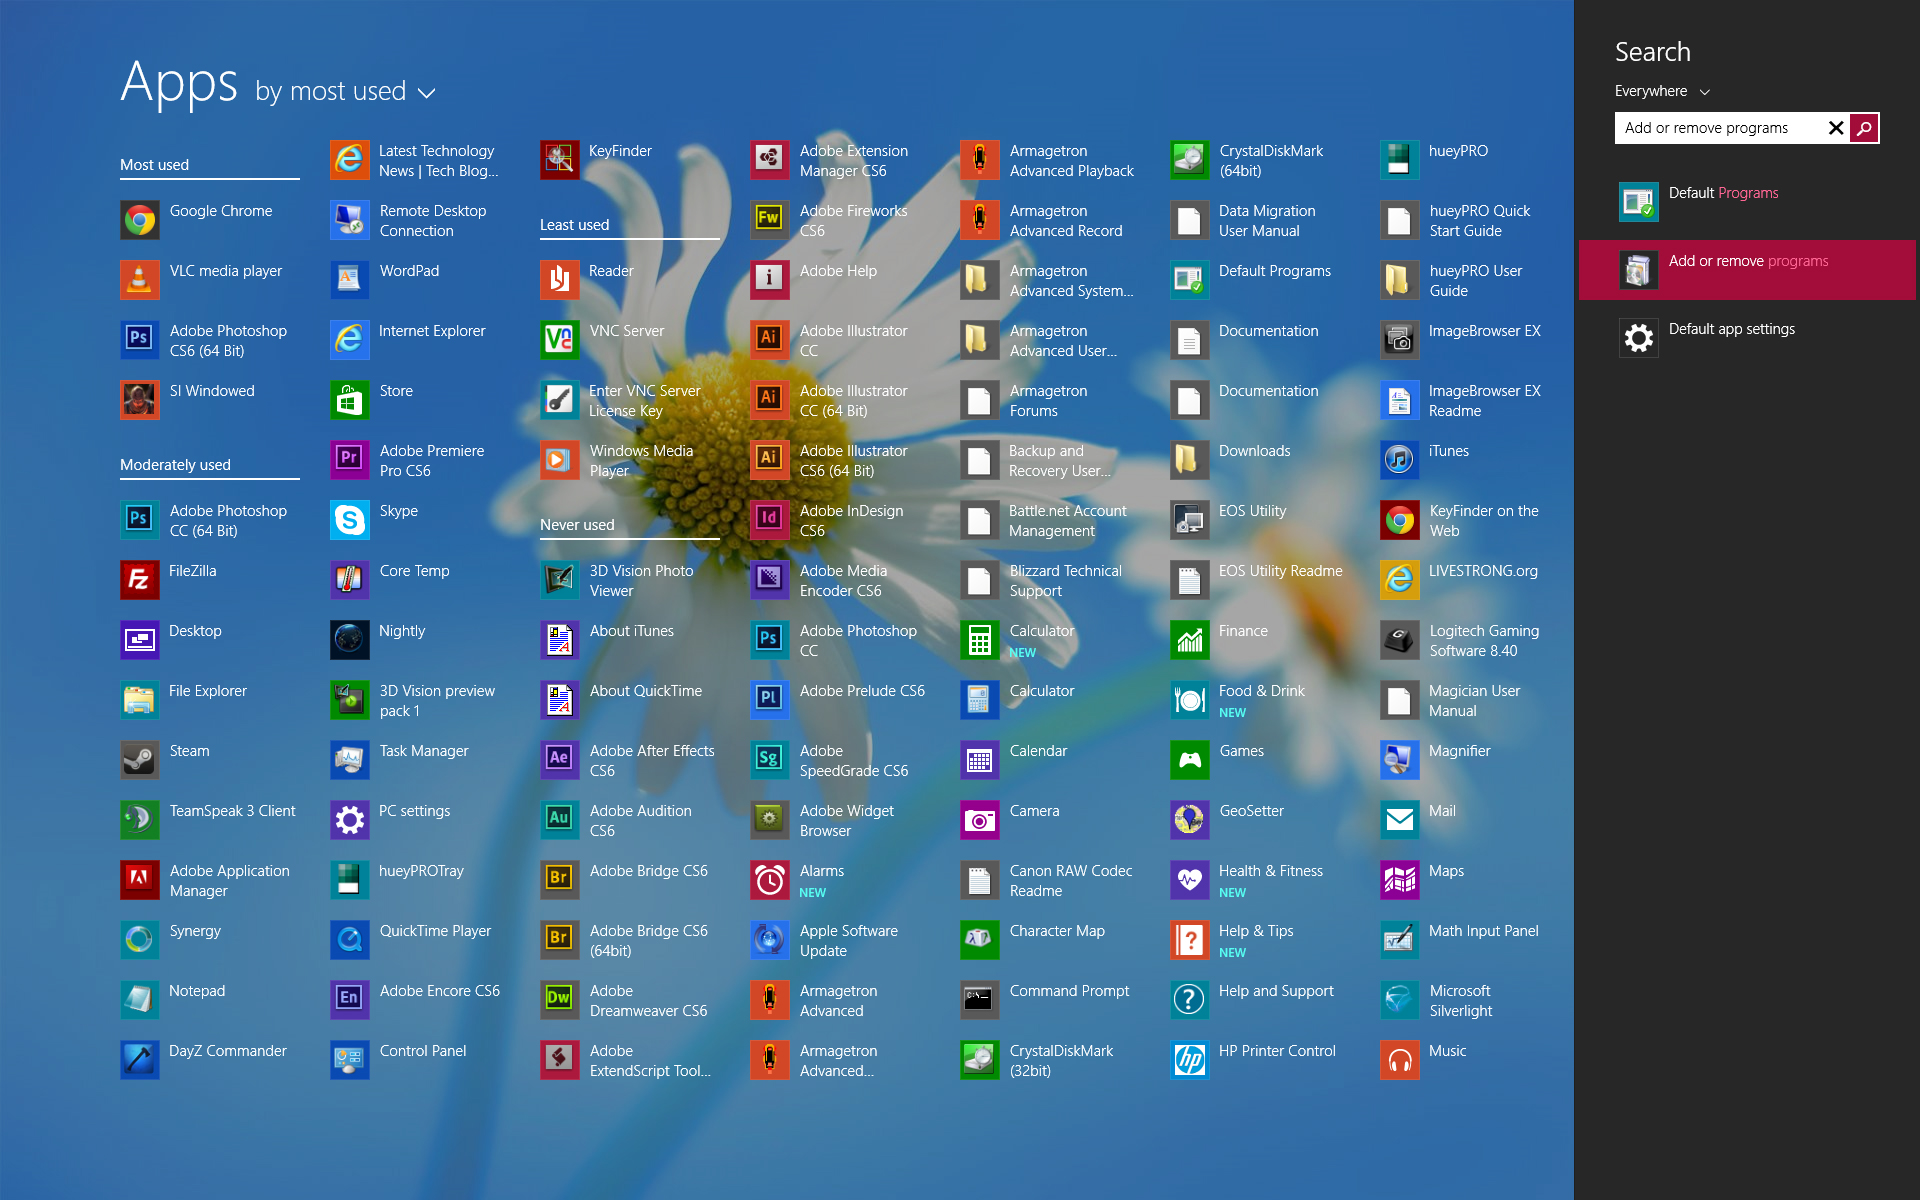 Windows 81 Desktop review Its finally safe to upgrade from